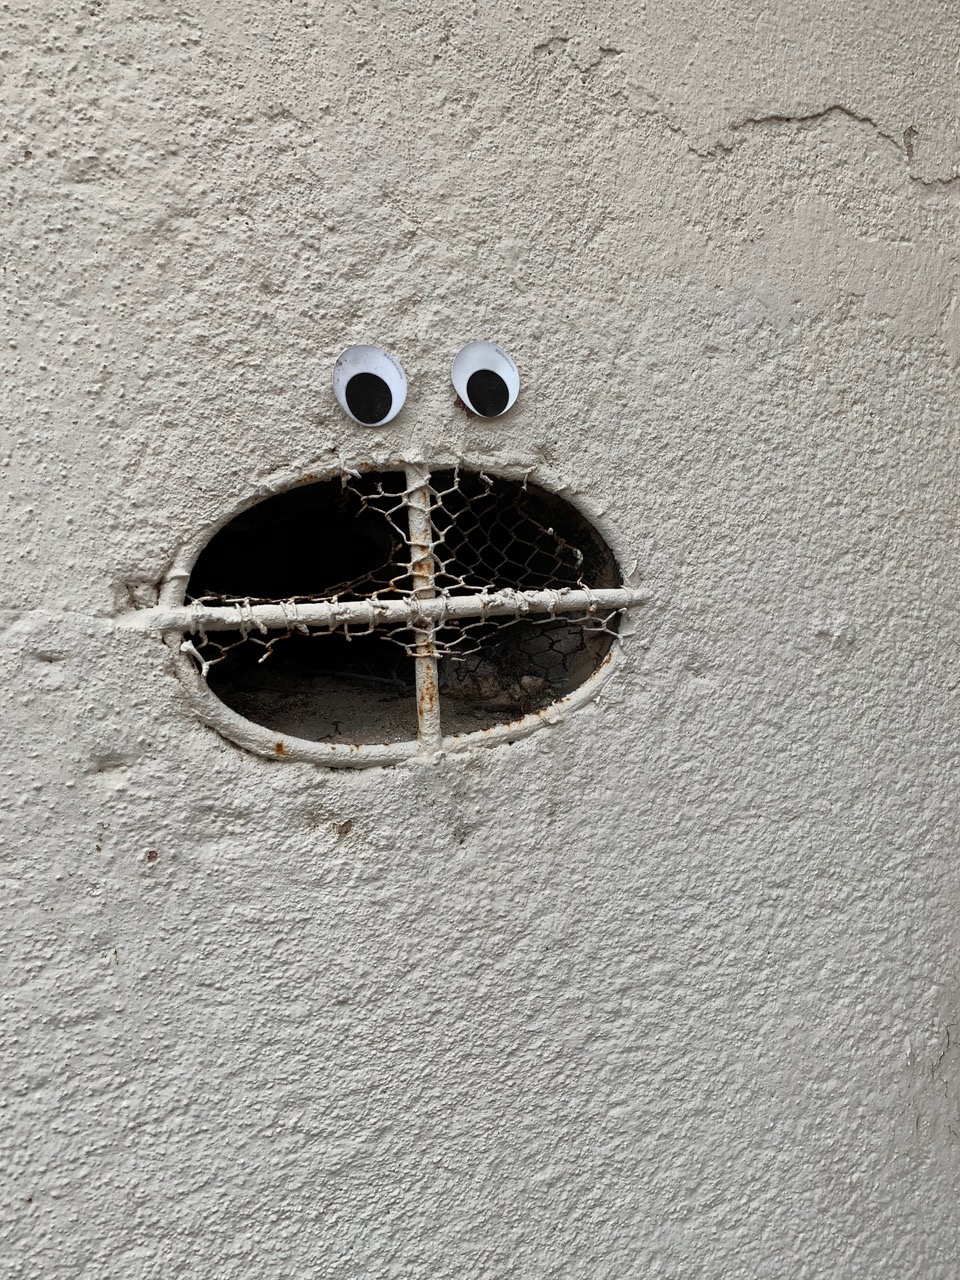 A holy in a wall with two googly eyes placed above